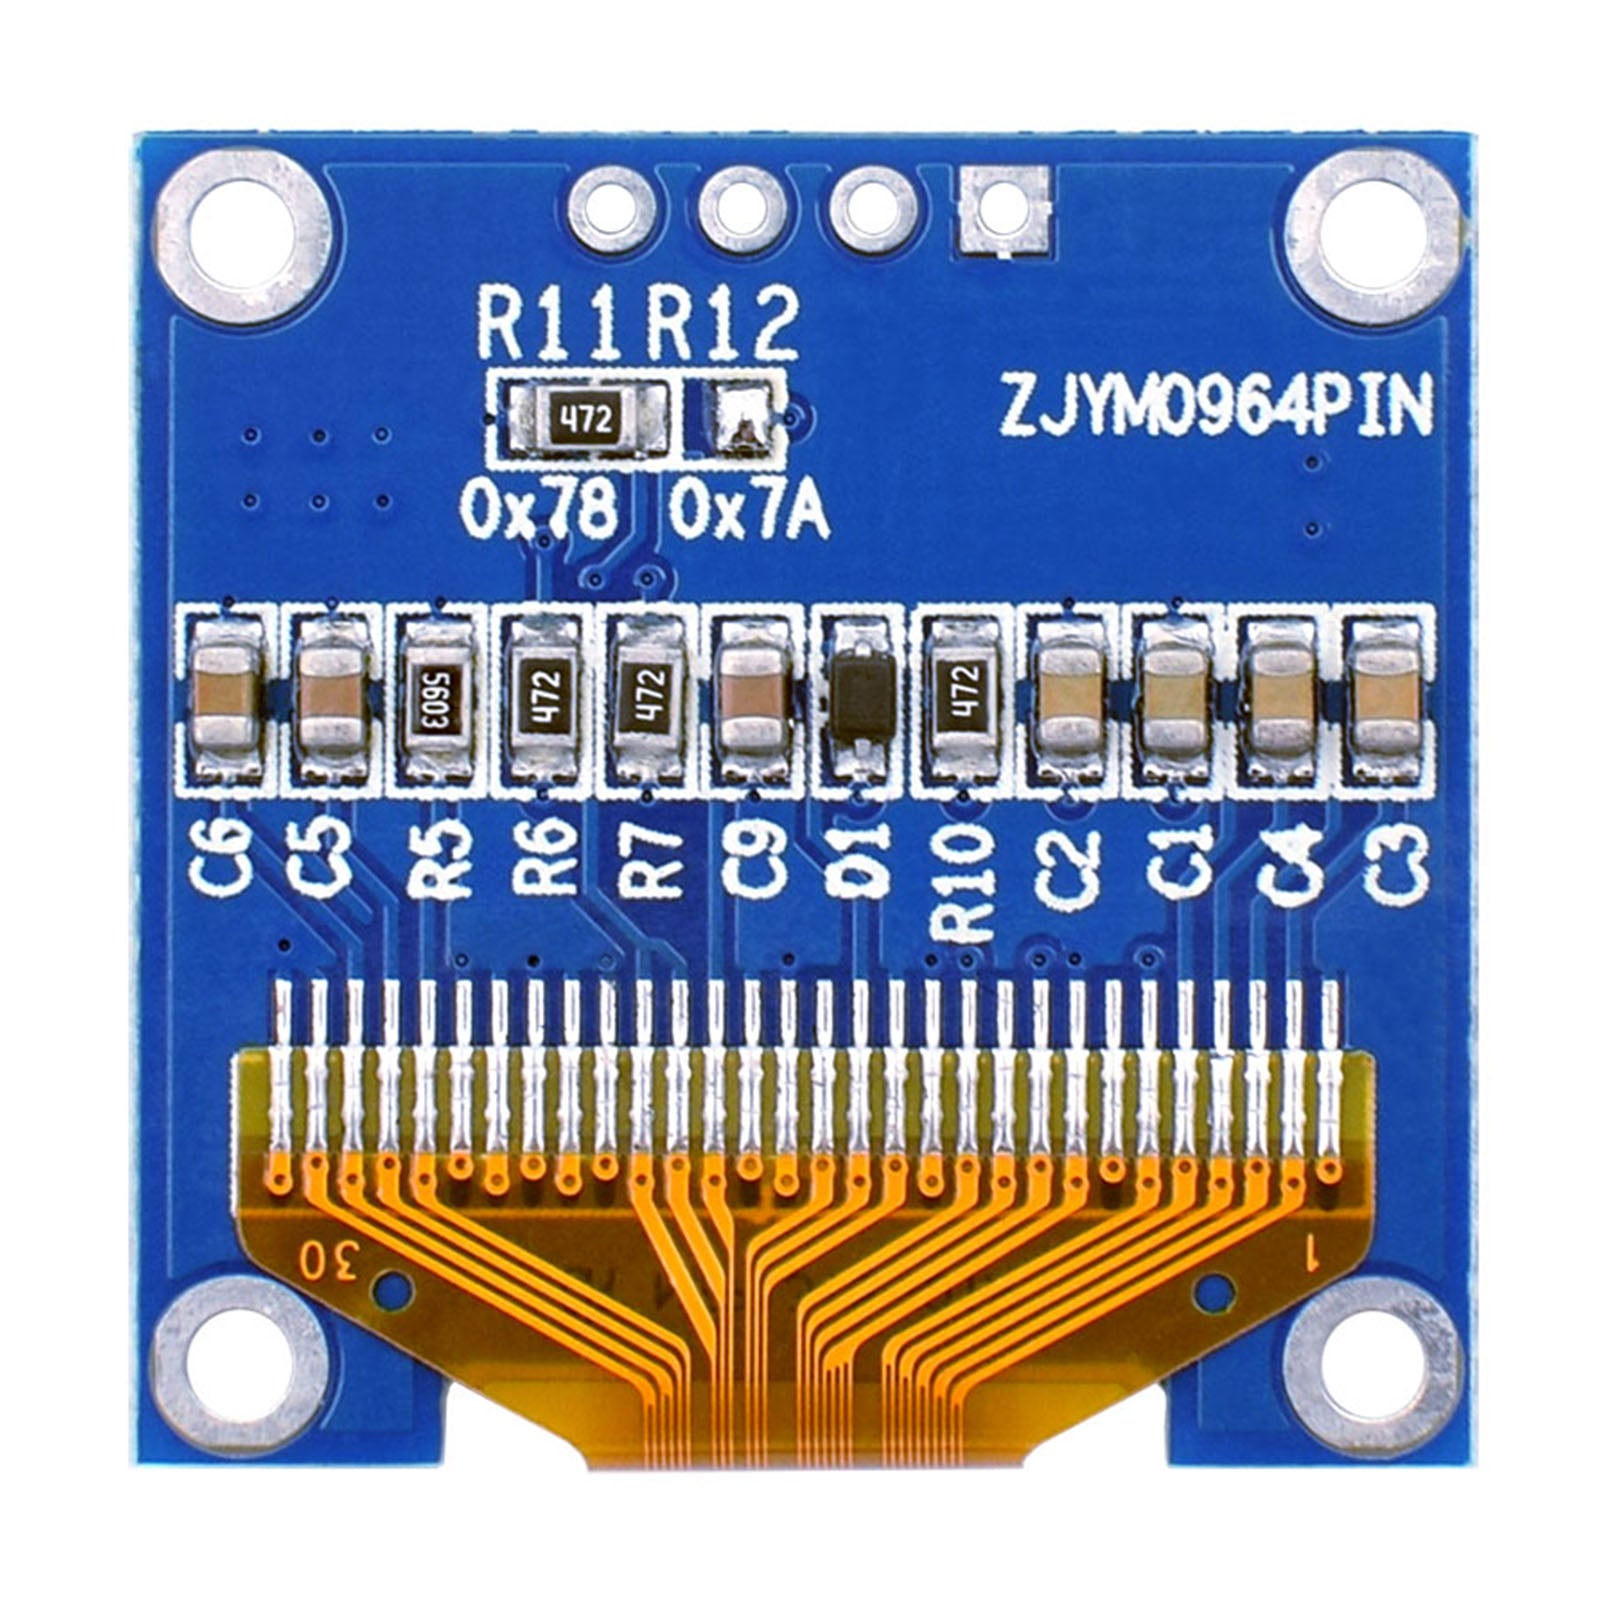 Back view of 0.96-inch OLED display module